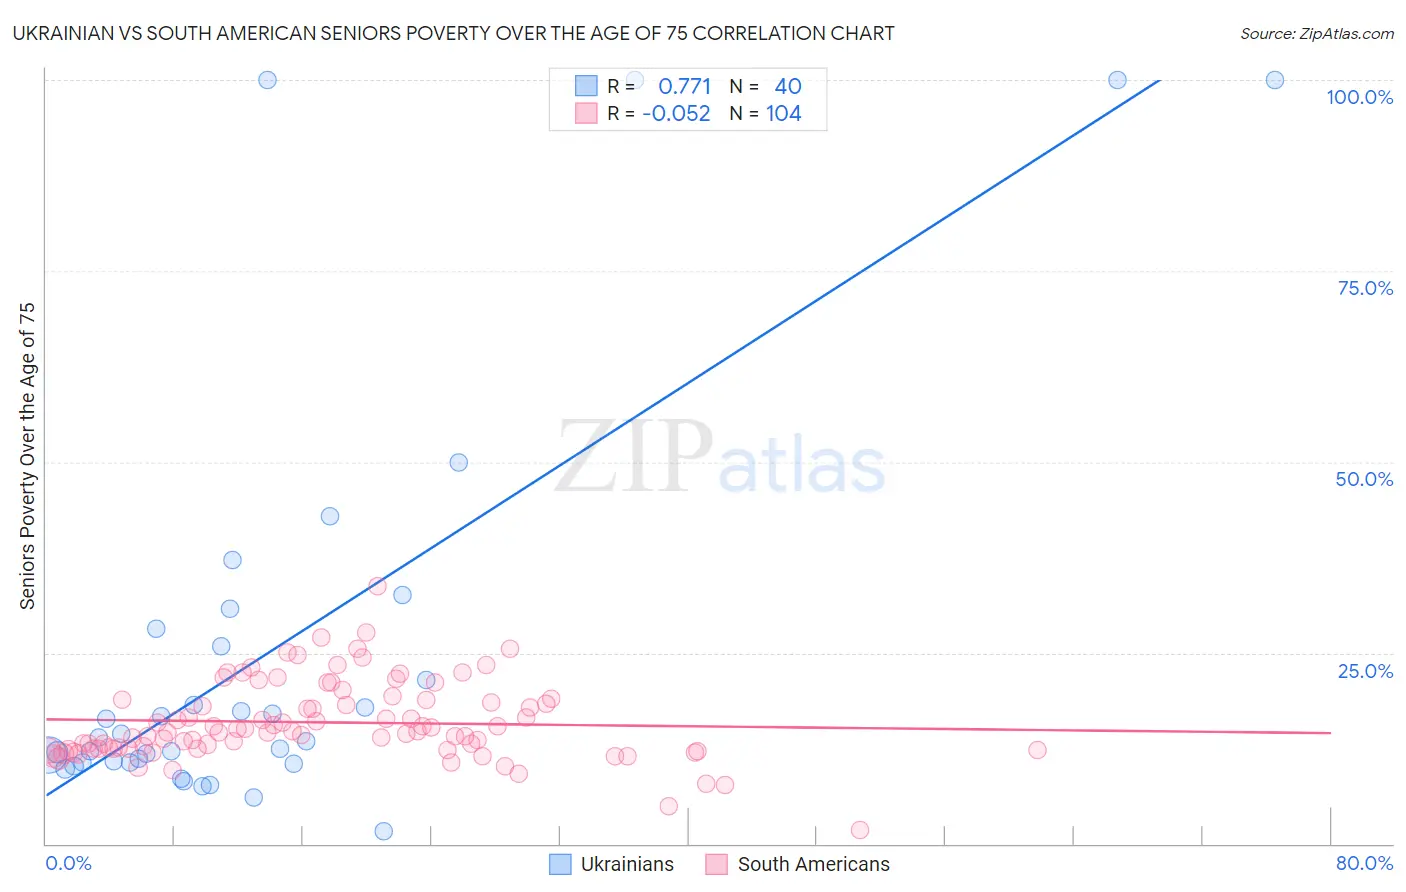 Ukrainian vs South American Seniors Poverty Over the Age of 75